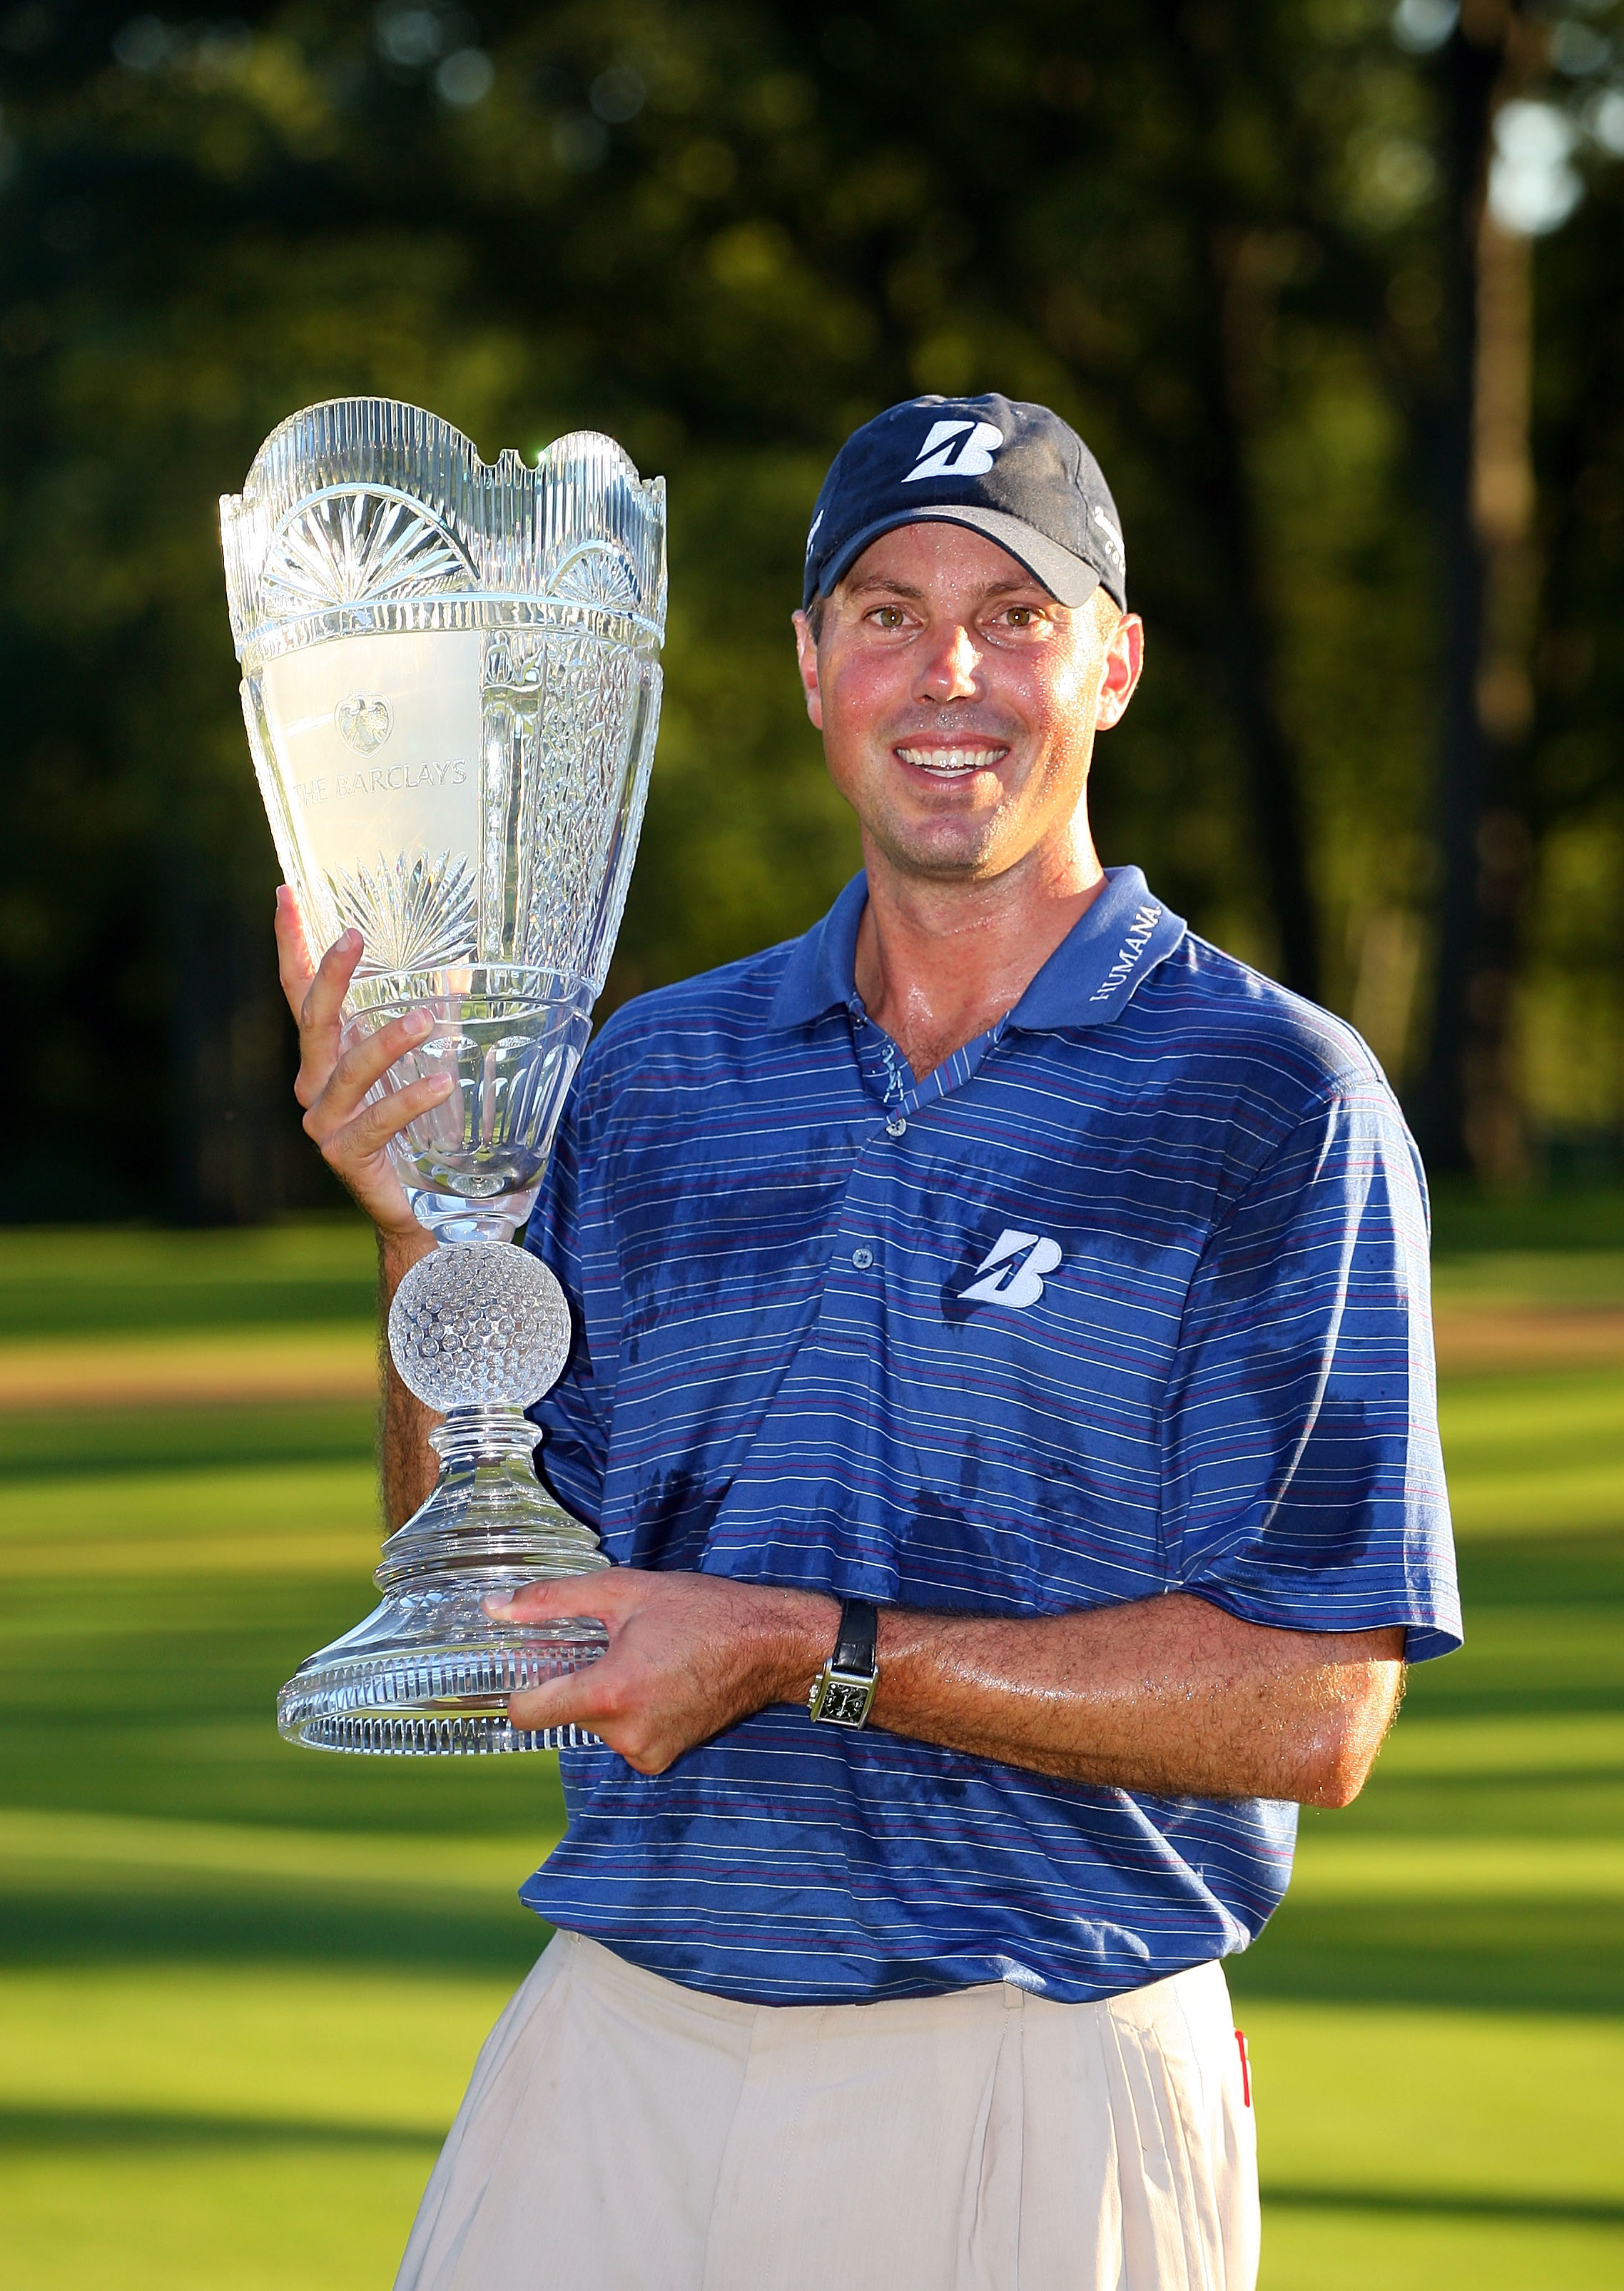 PARAMUS, NJ - AUGUST 29:  Matt Kuchar poses with the trophy after winning The Barclays at the Ridgewood Country Club on August 29, 2010 in Paramus, New Jersey. Kuchar won on a one hole playoff.  (Photo by Hunter Martin/Getty Images)